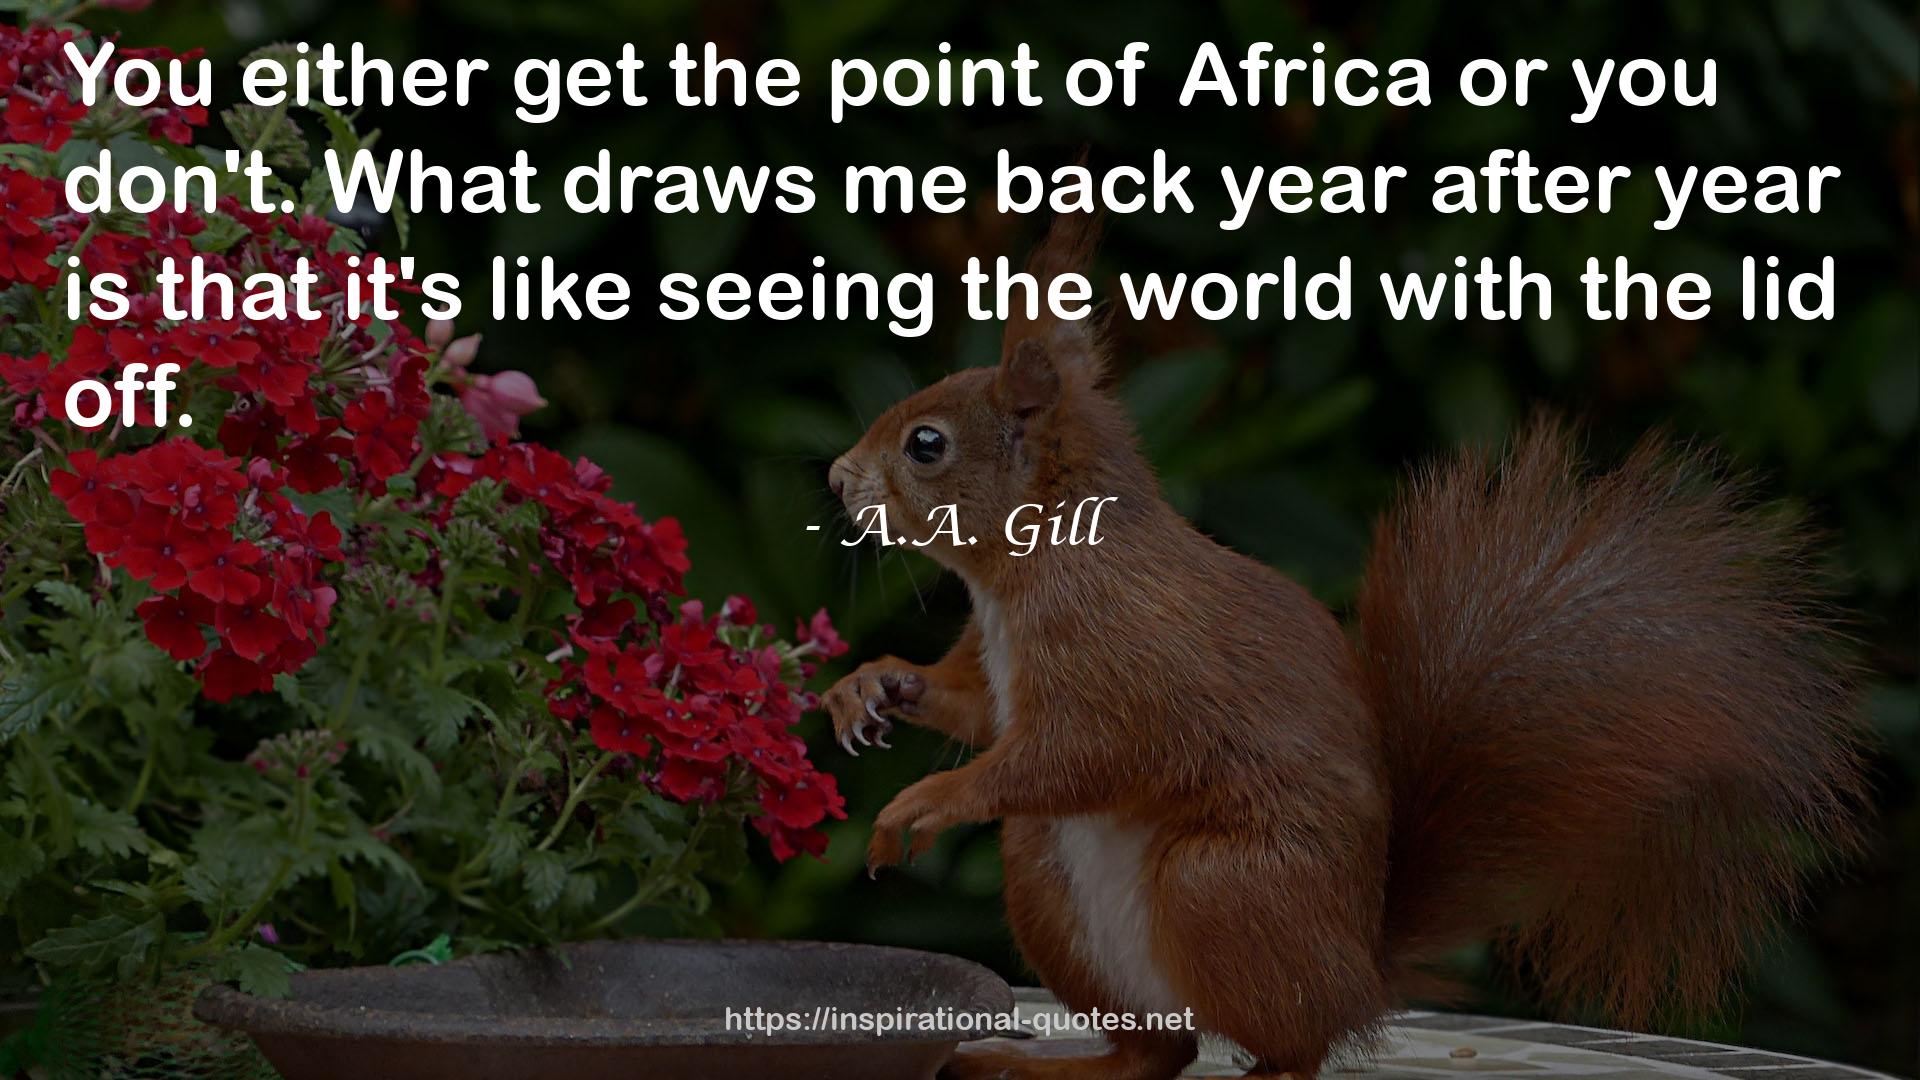 A.A. Gill QUOTES